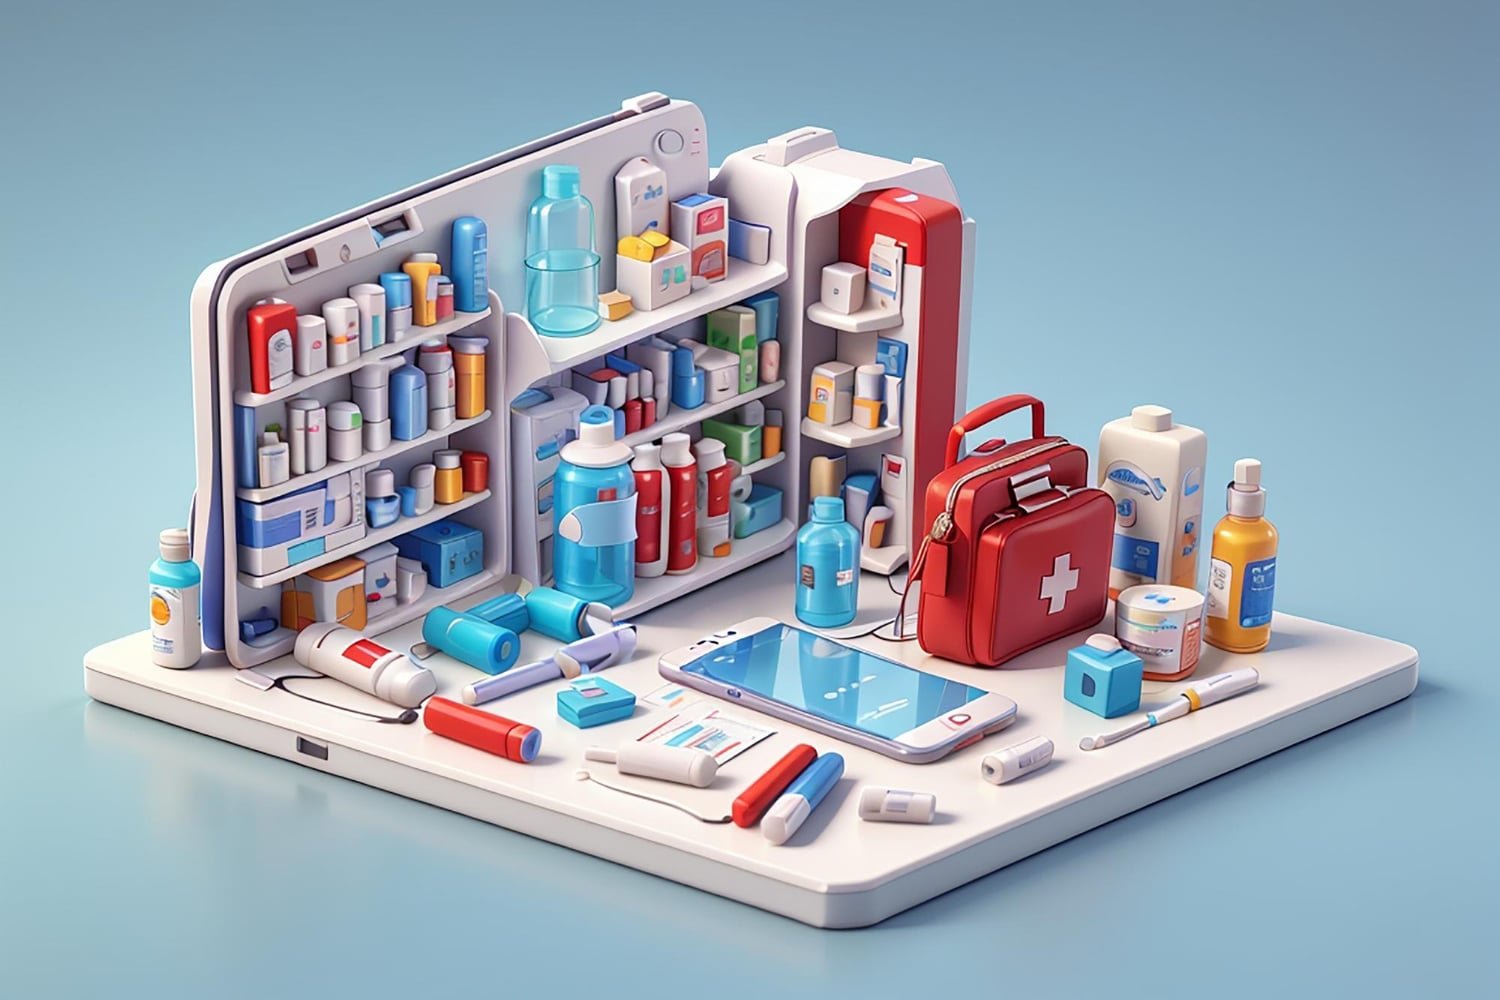 Find Everything You Need For Your Health With Pharmacy Online’s Wide Range Of Products